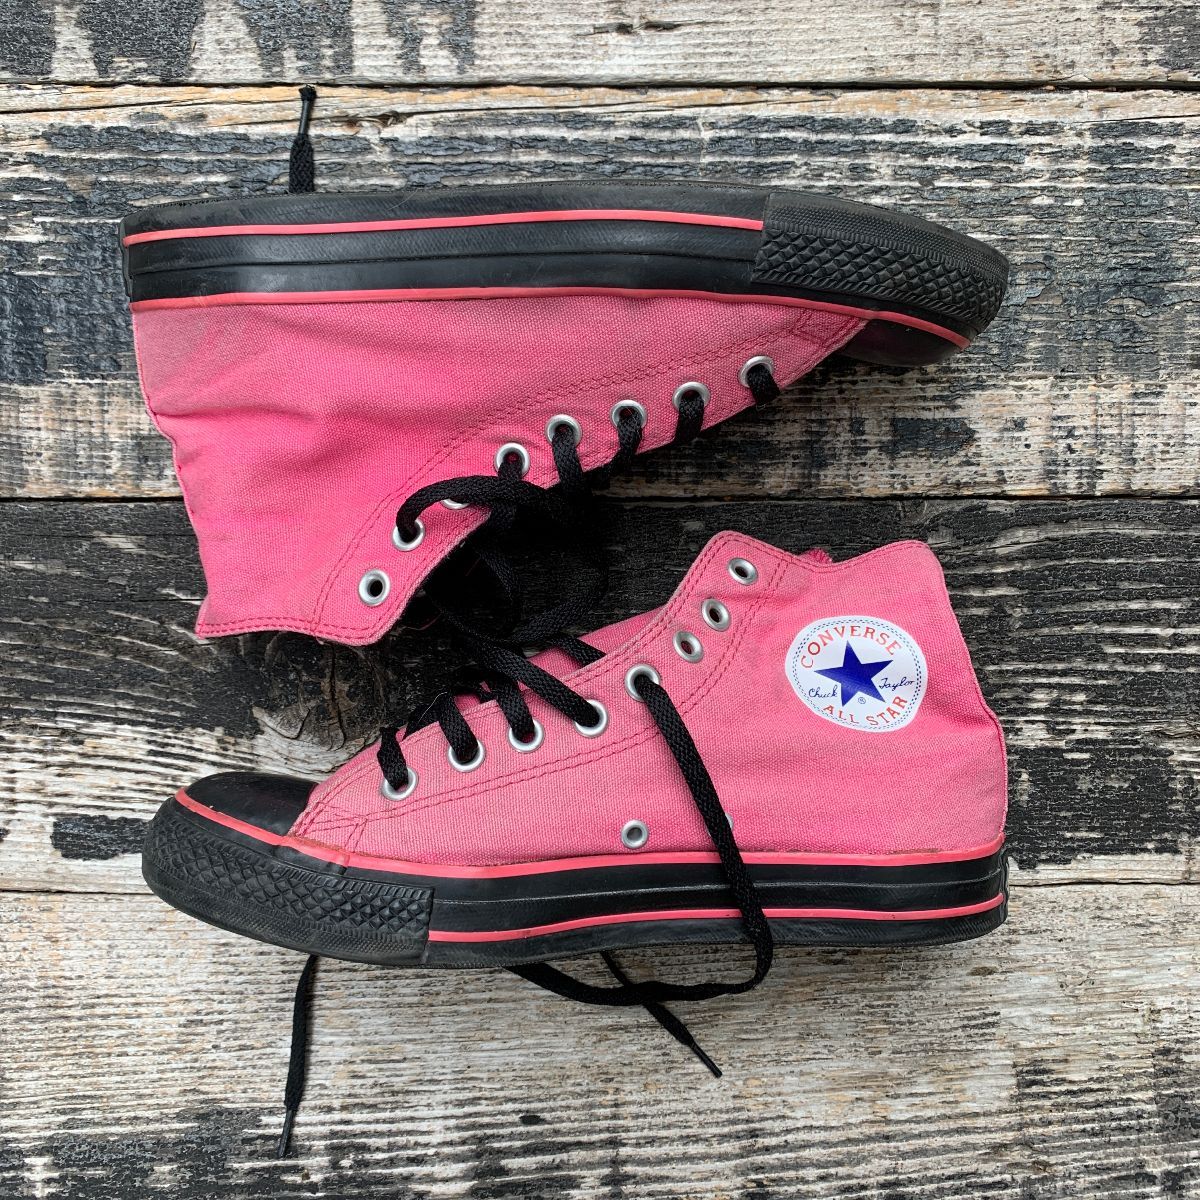 black and pink high tops